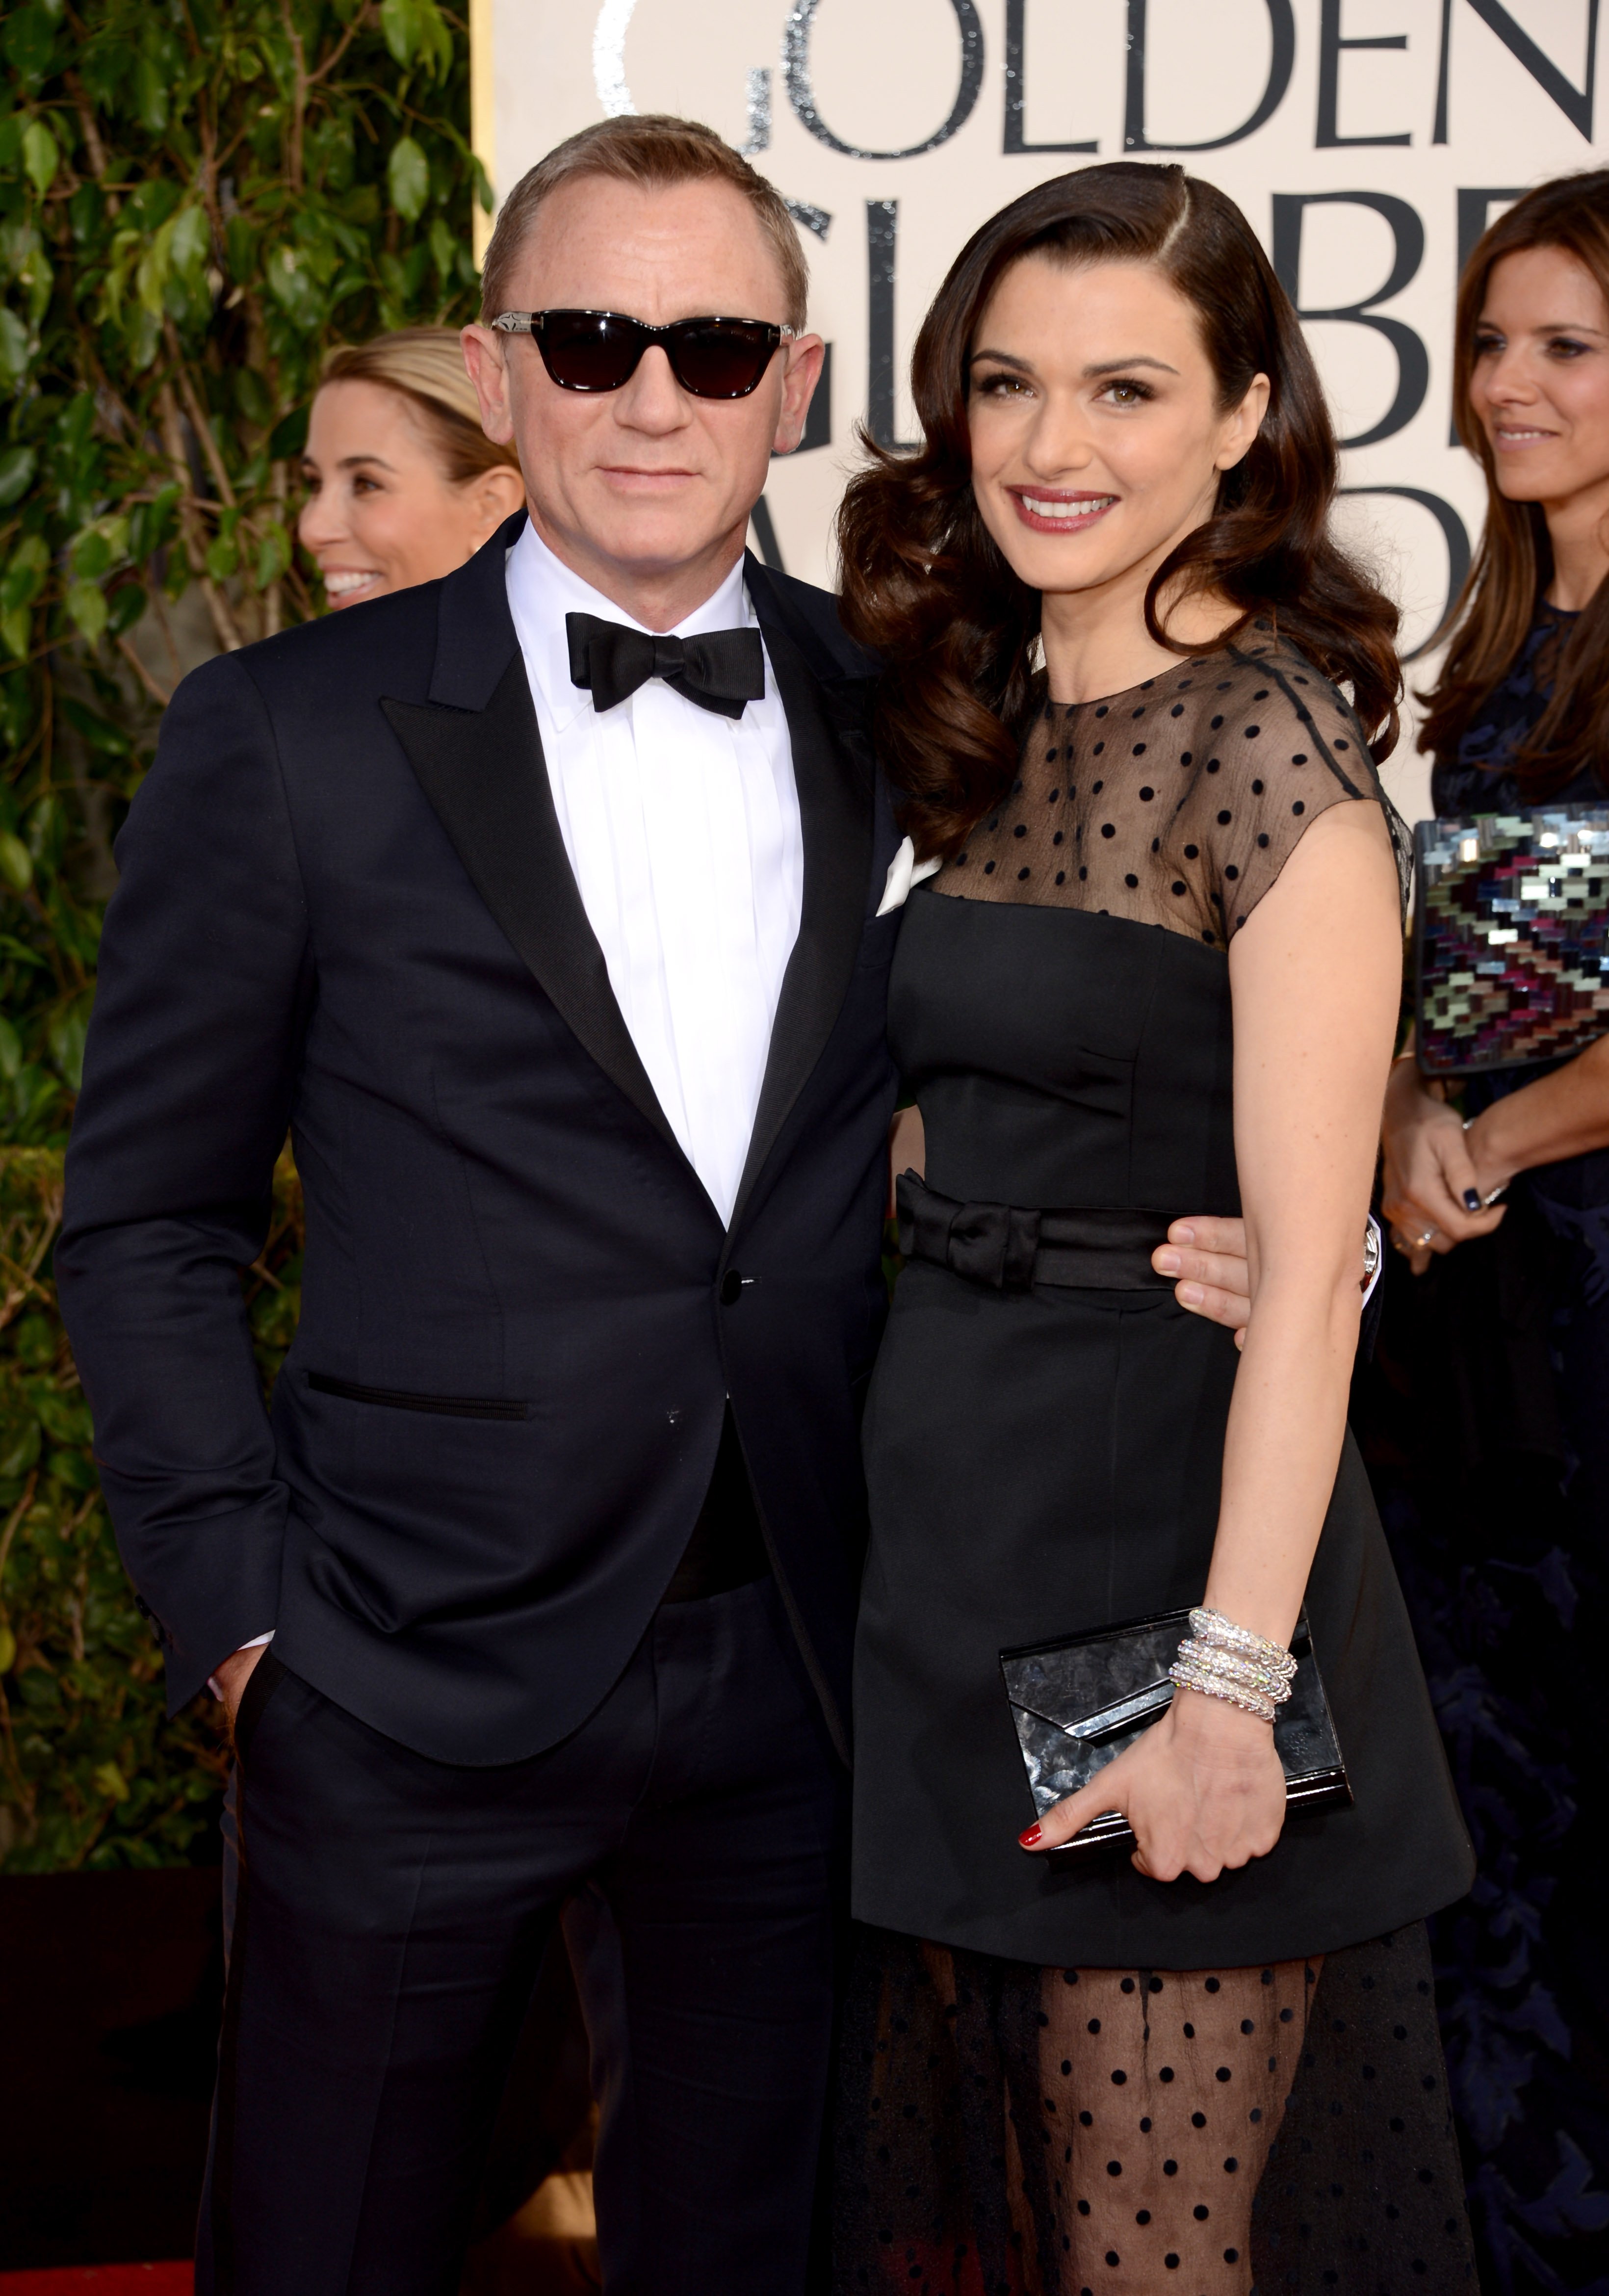 Daniel Craig and Rachel Weisz attend the 70th Annual Golden Globe Awards on January 13, 2013, in Beverly Hills, California. | Source: Getty Images